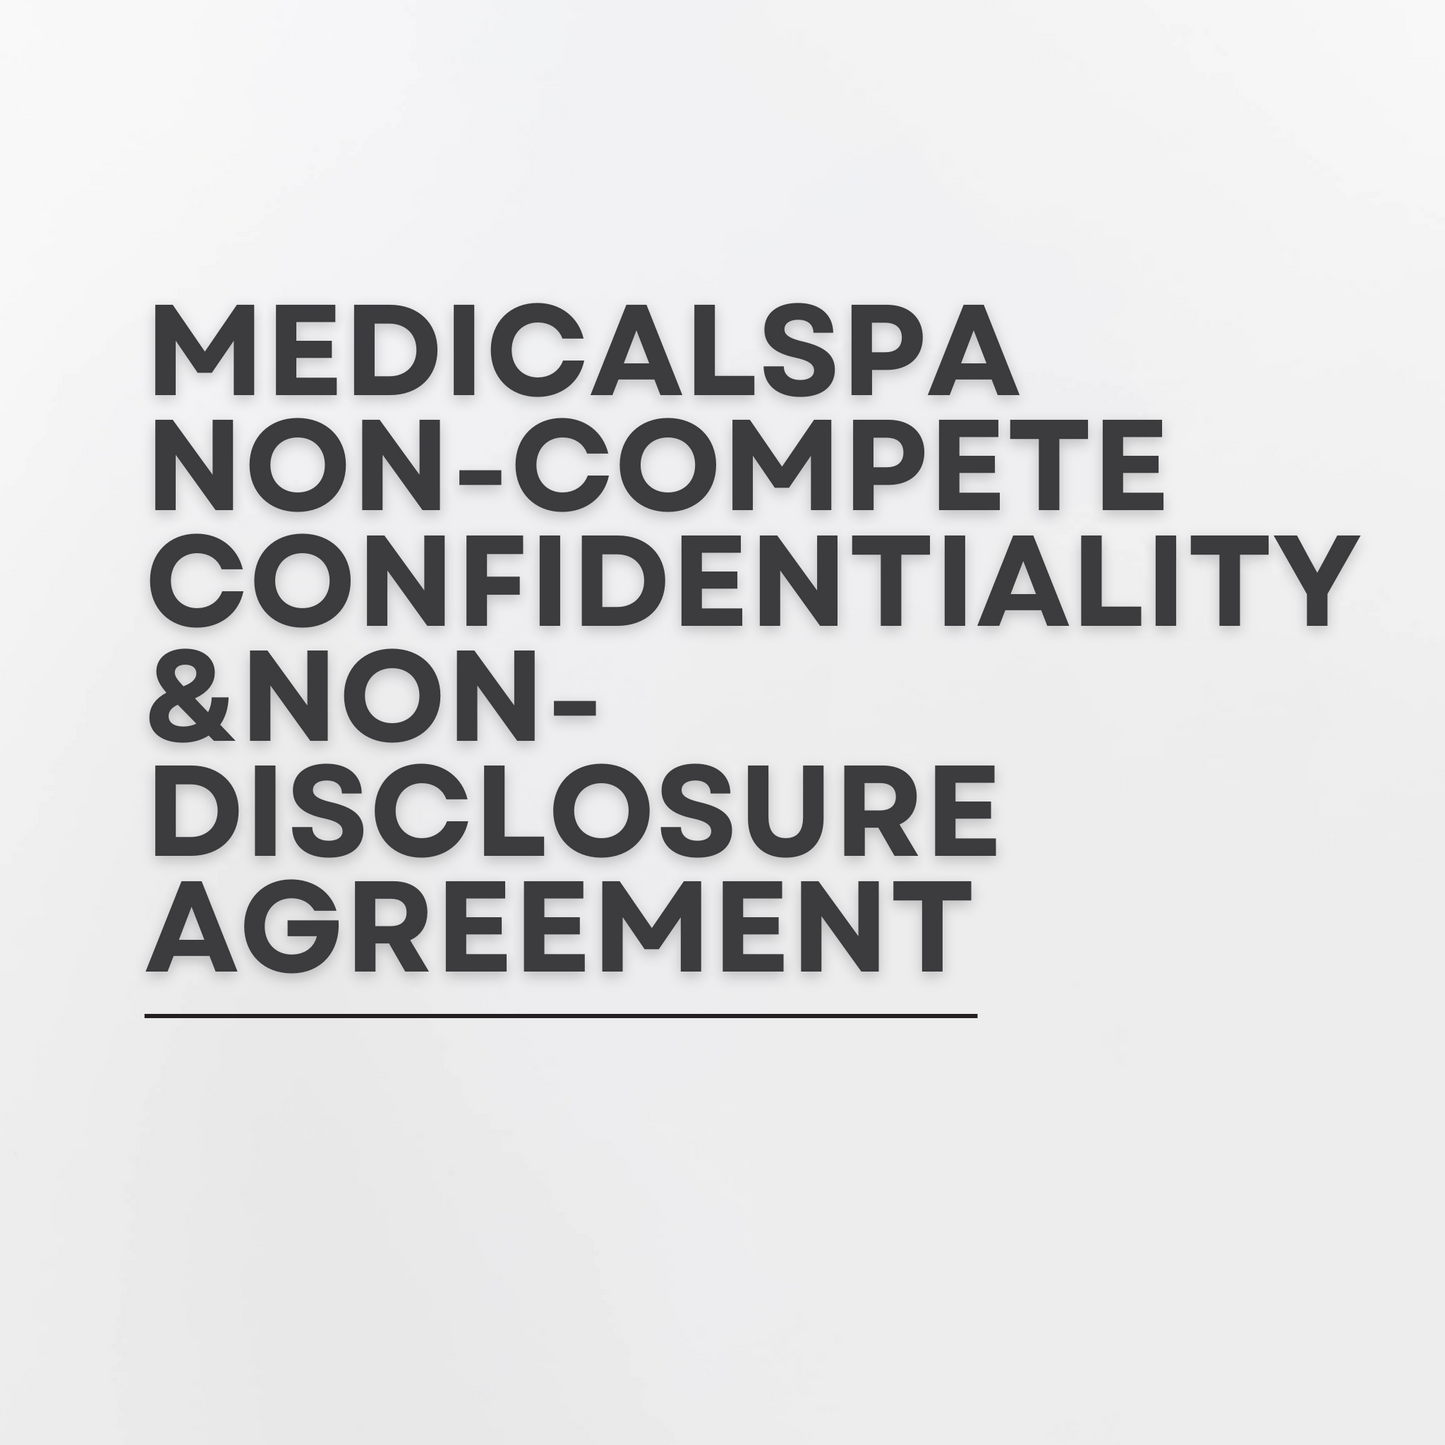 Medical SPA Non-compete, Confidentiality and Non-Disclosure Agreement